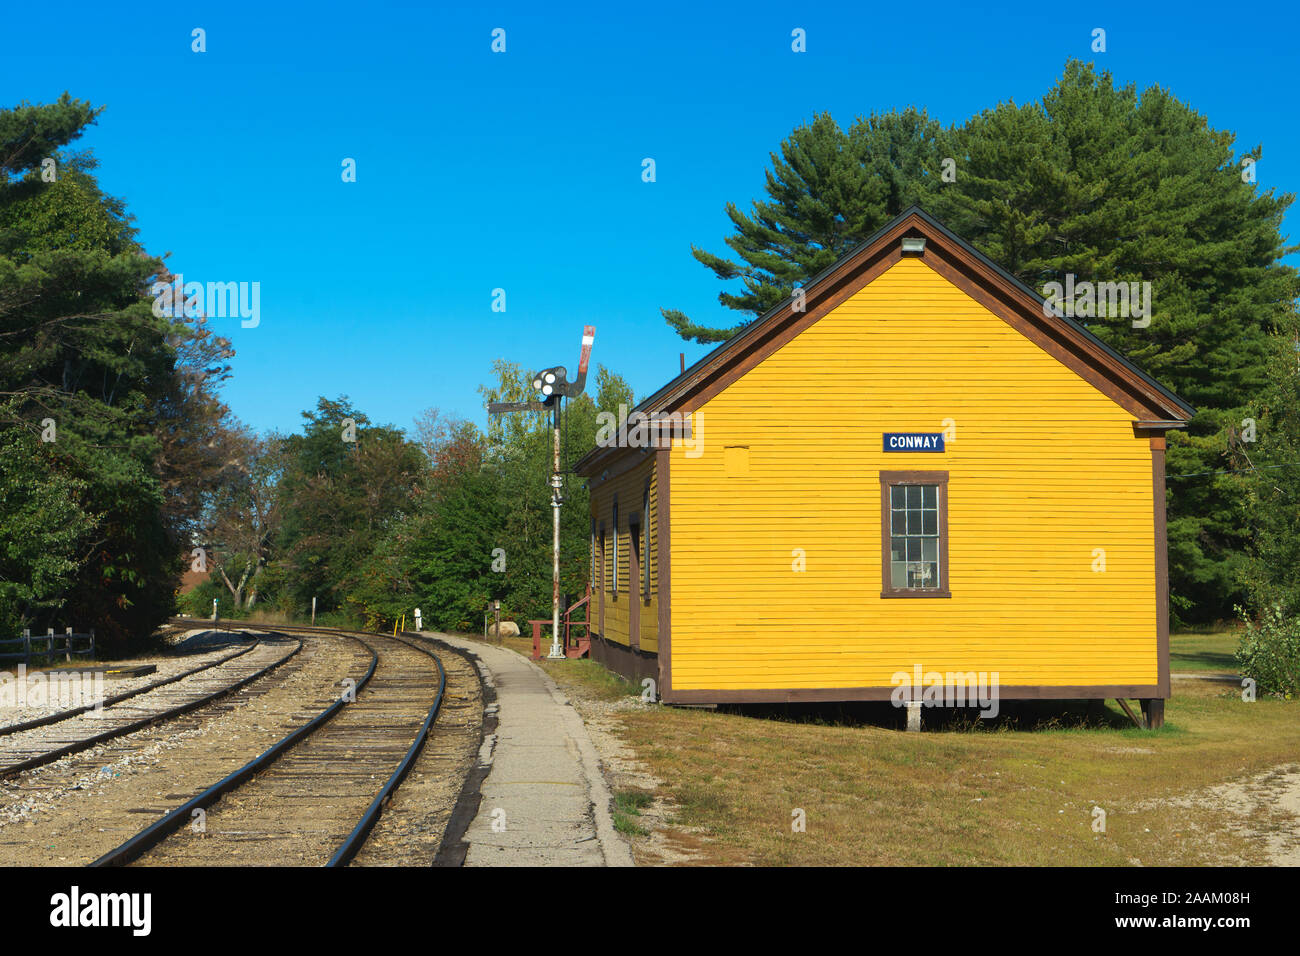 Old wooden Conway train station, New Hampshire, USA. Stock Photo